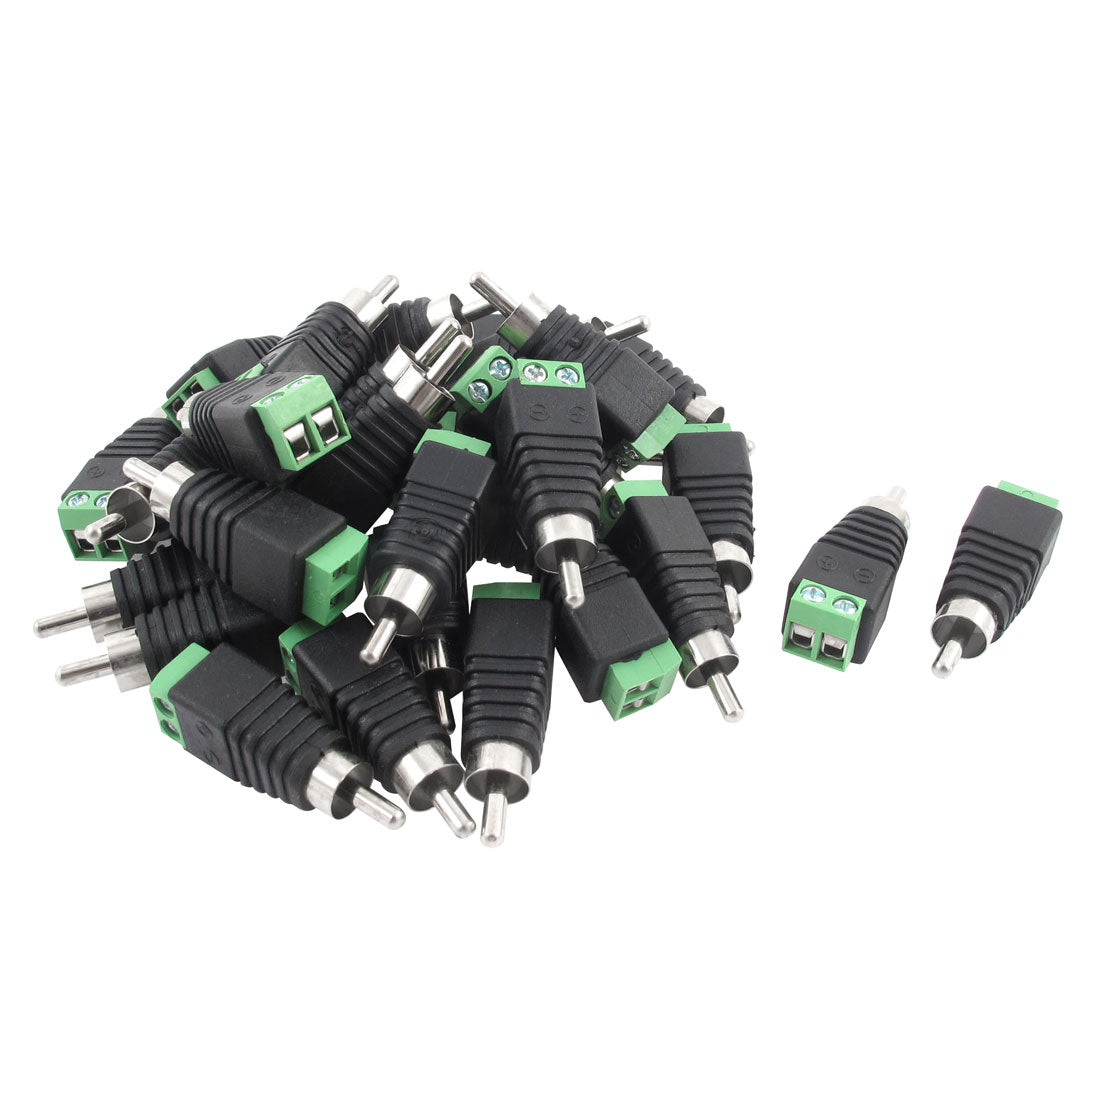 uxcell Uxcell 30pcs UTP Cat5 Cat6 Cable to AV Phono RCA Male Jack Adapter for CCTV